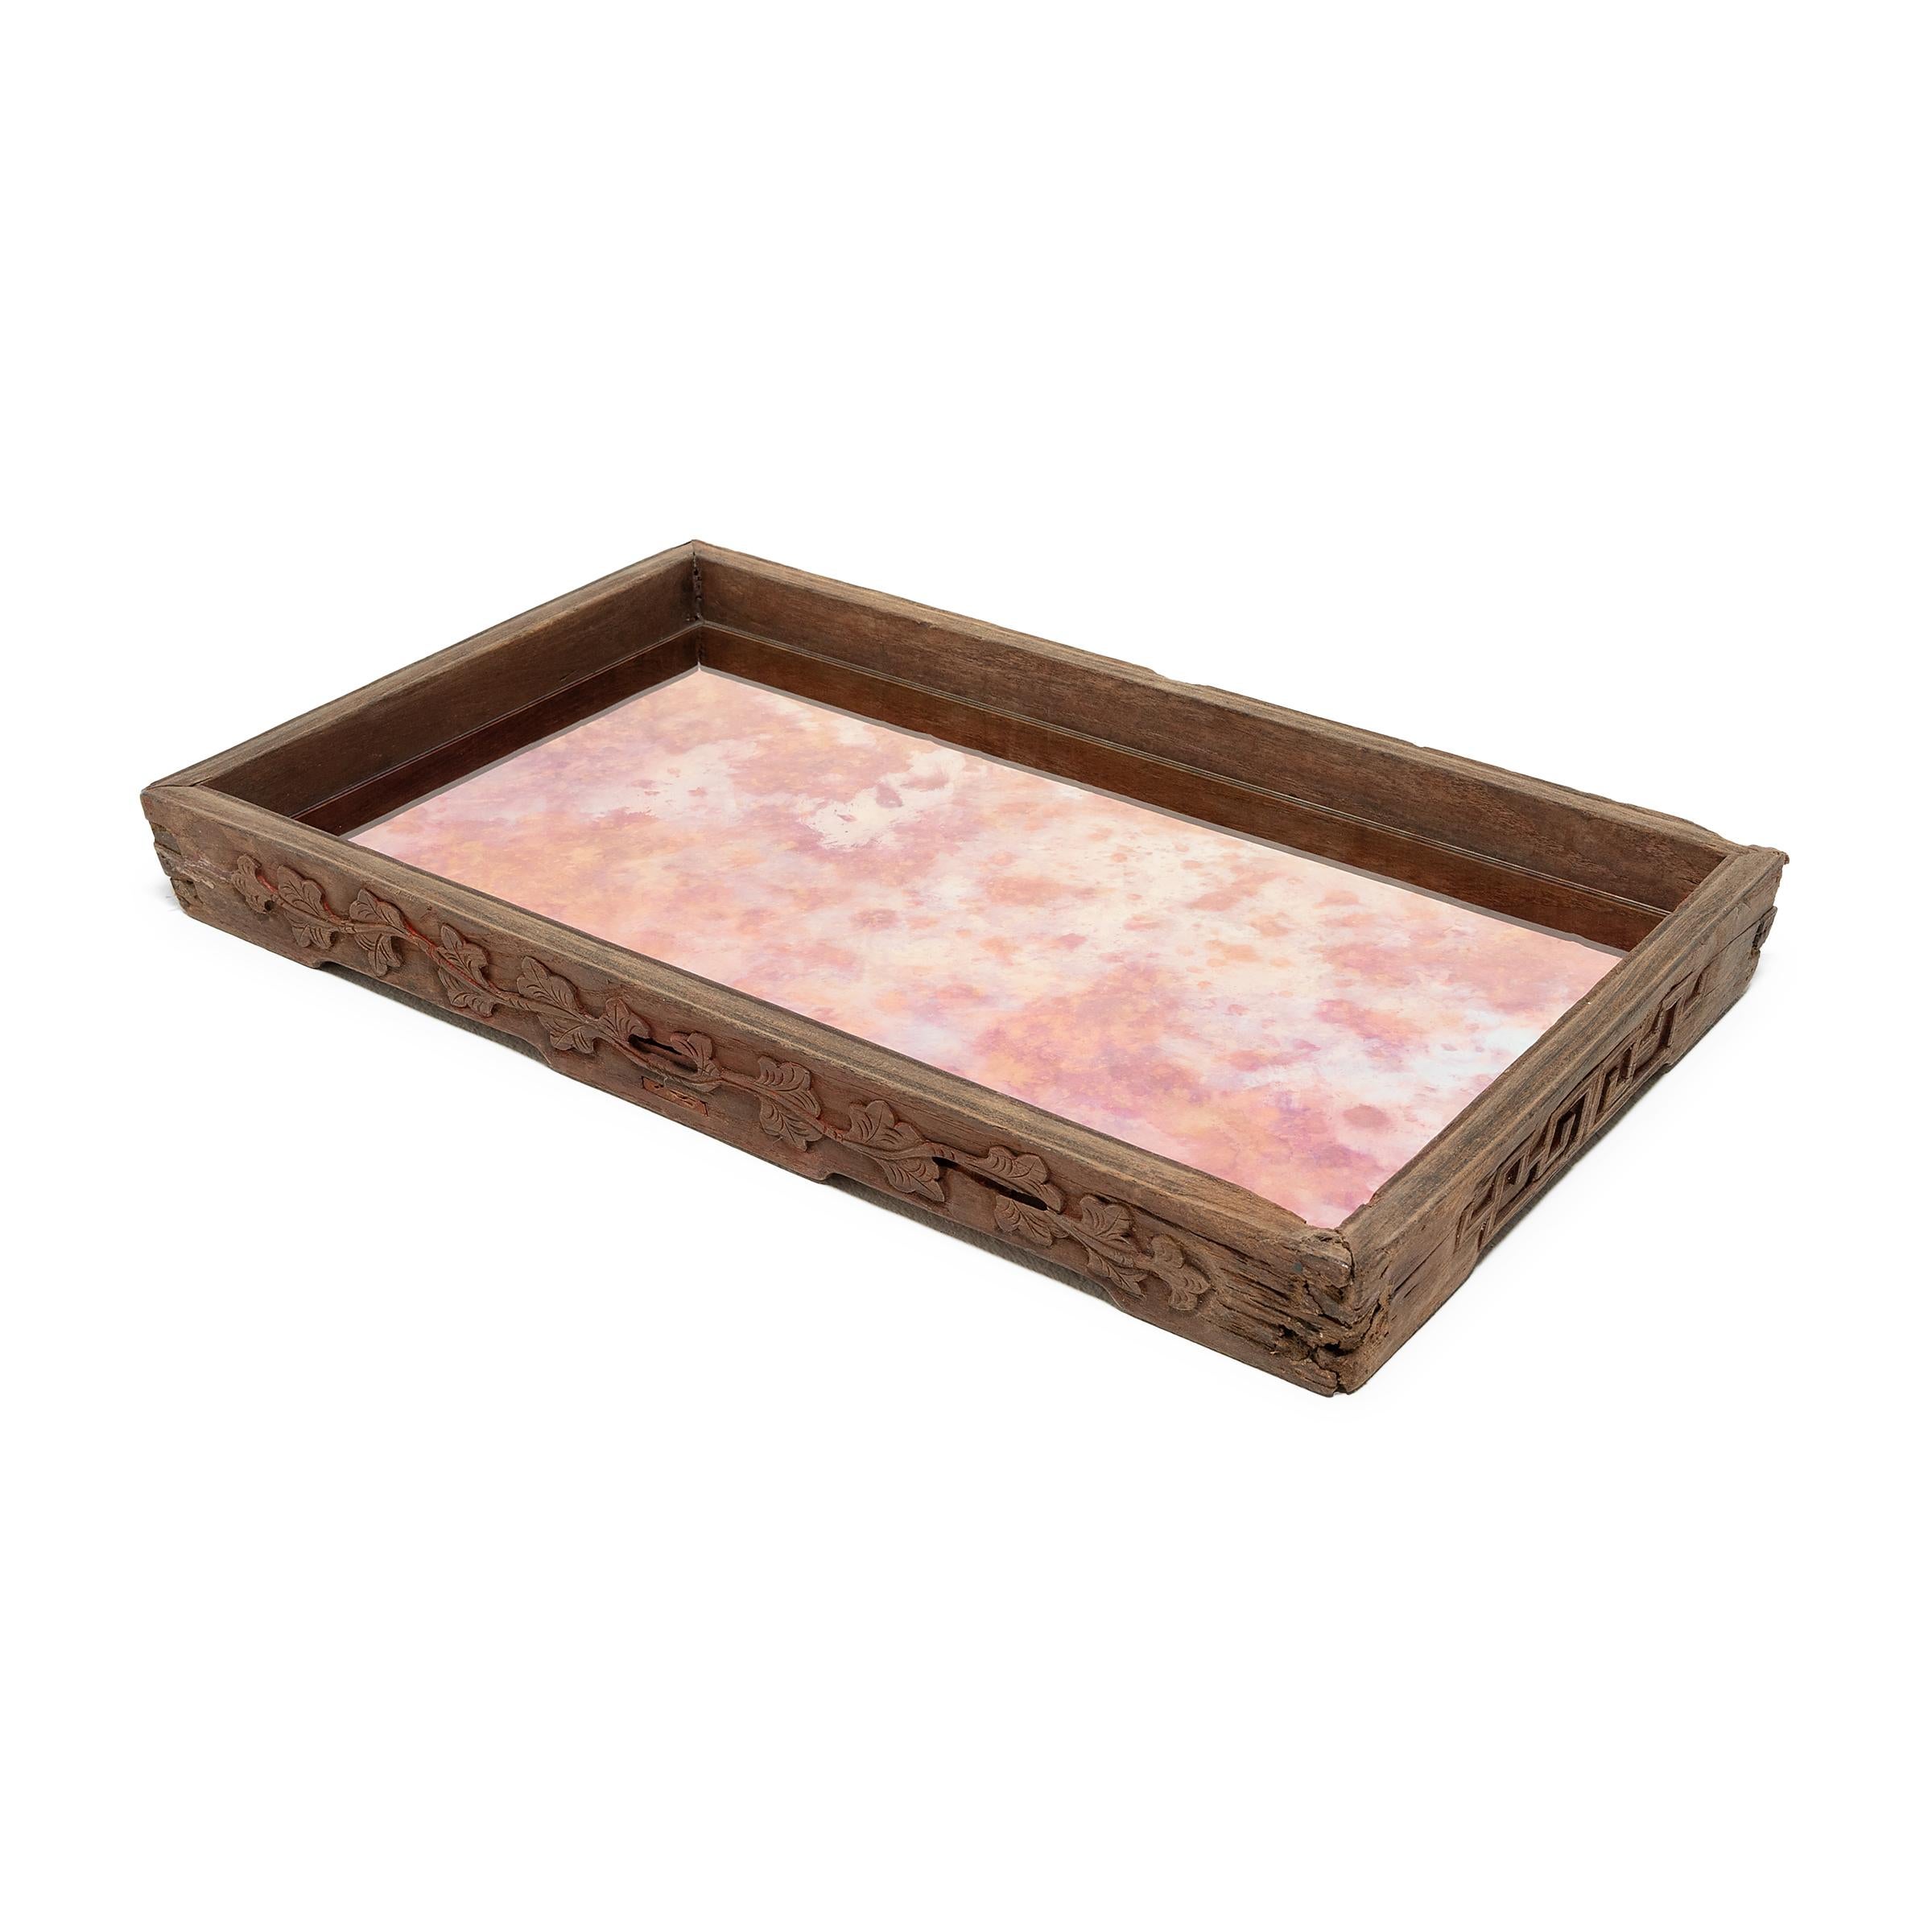 Dovetail joinery and carved floral scrollwork add charming detail to the simple lines of this century-old provincial tray. The rectangular tray has developed great character from years of serving tea, likely for friends and family gathered on